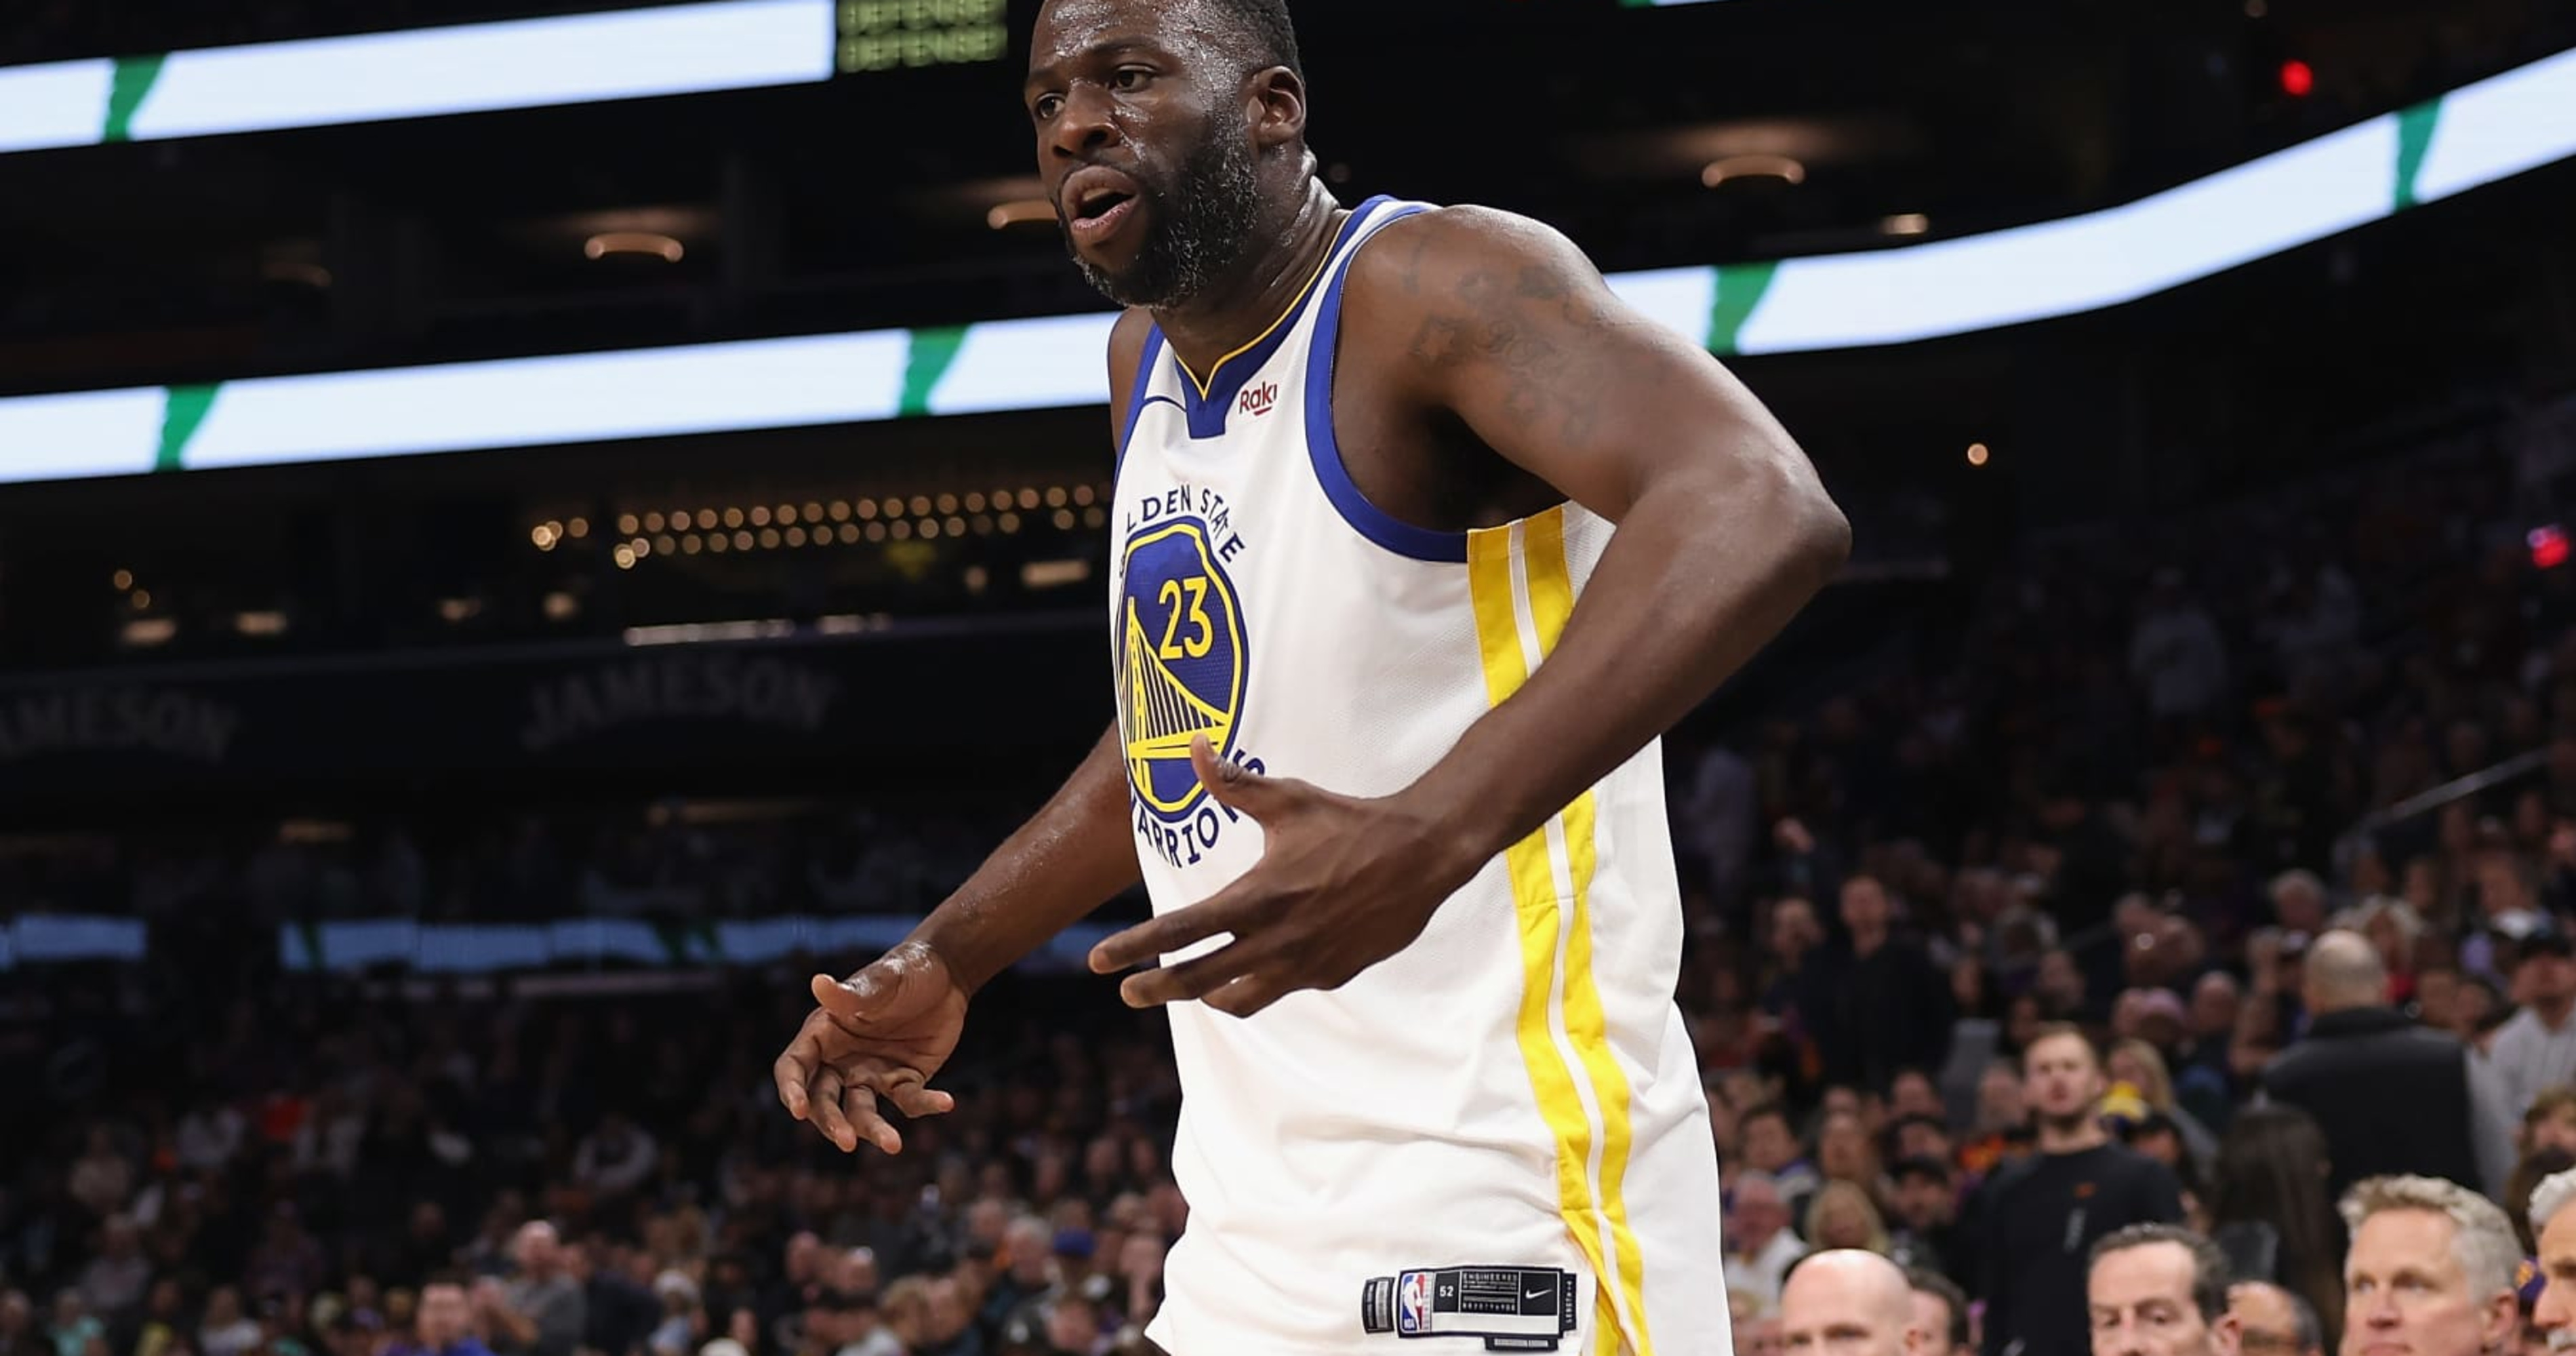 Report: Warriors' Draymond Green Expected to Miss 11-13 Games During NBA Suspension